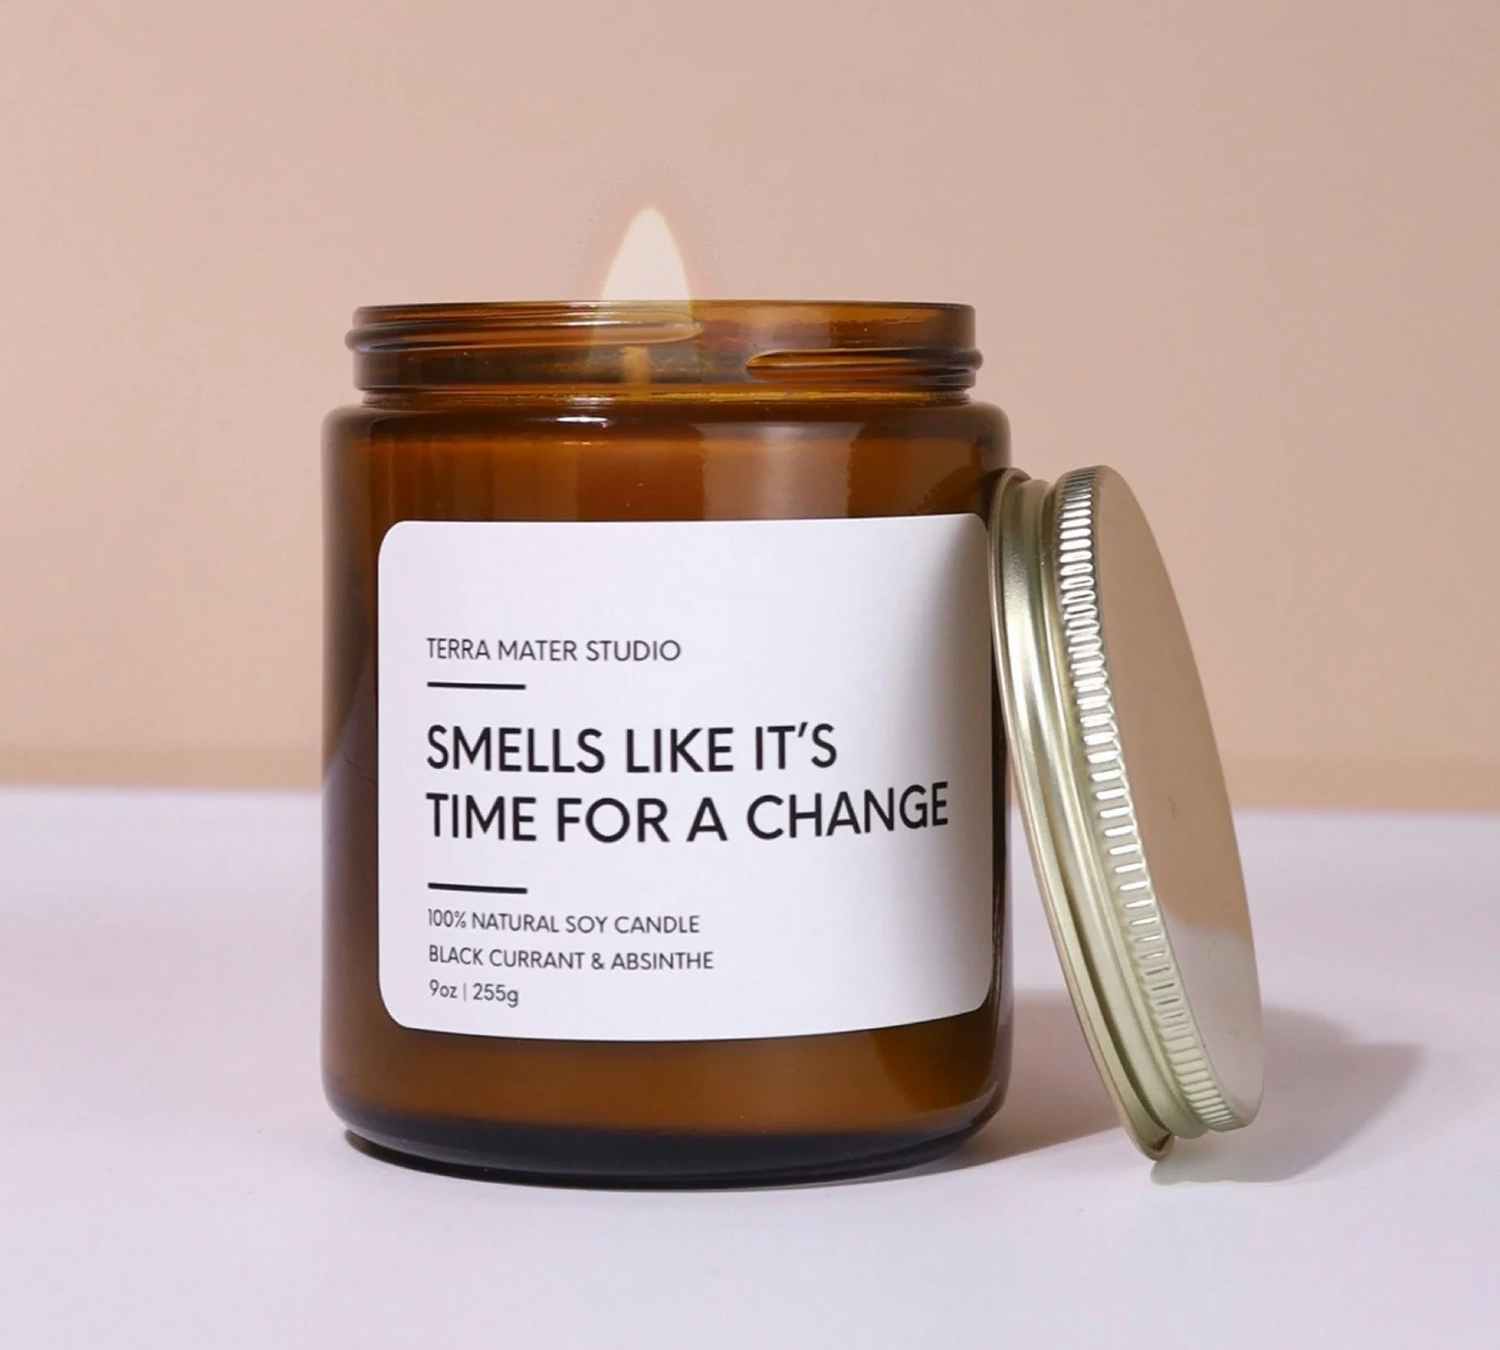 Smells like it's time for a change candle